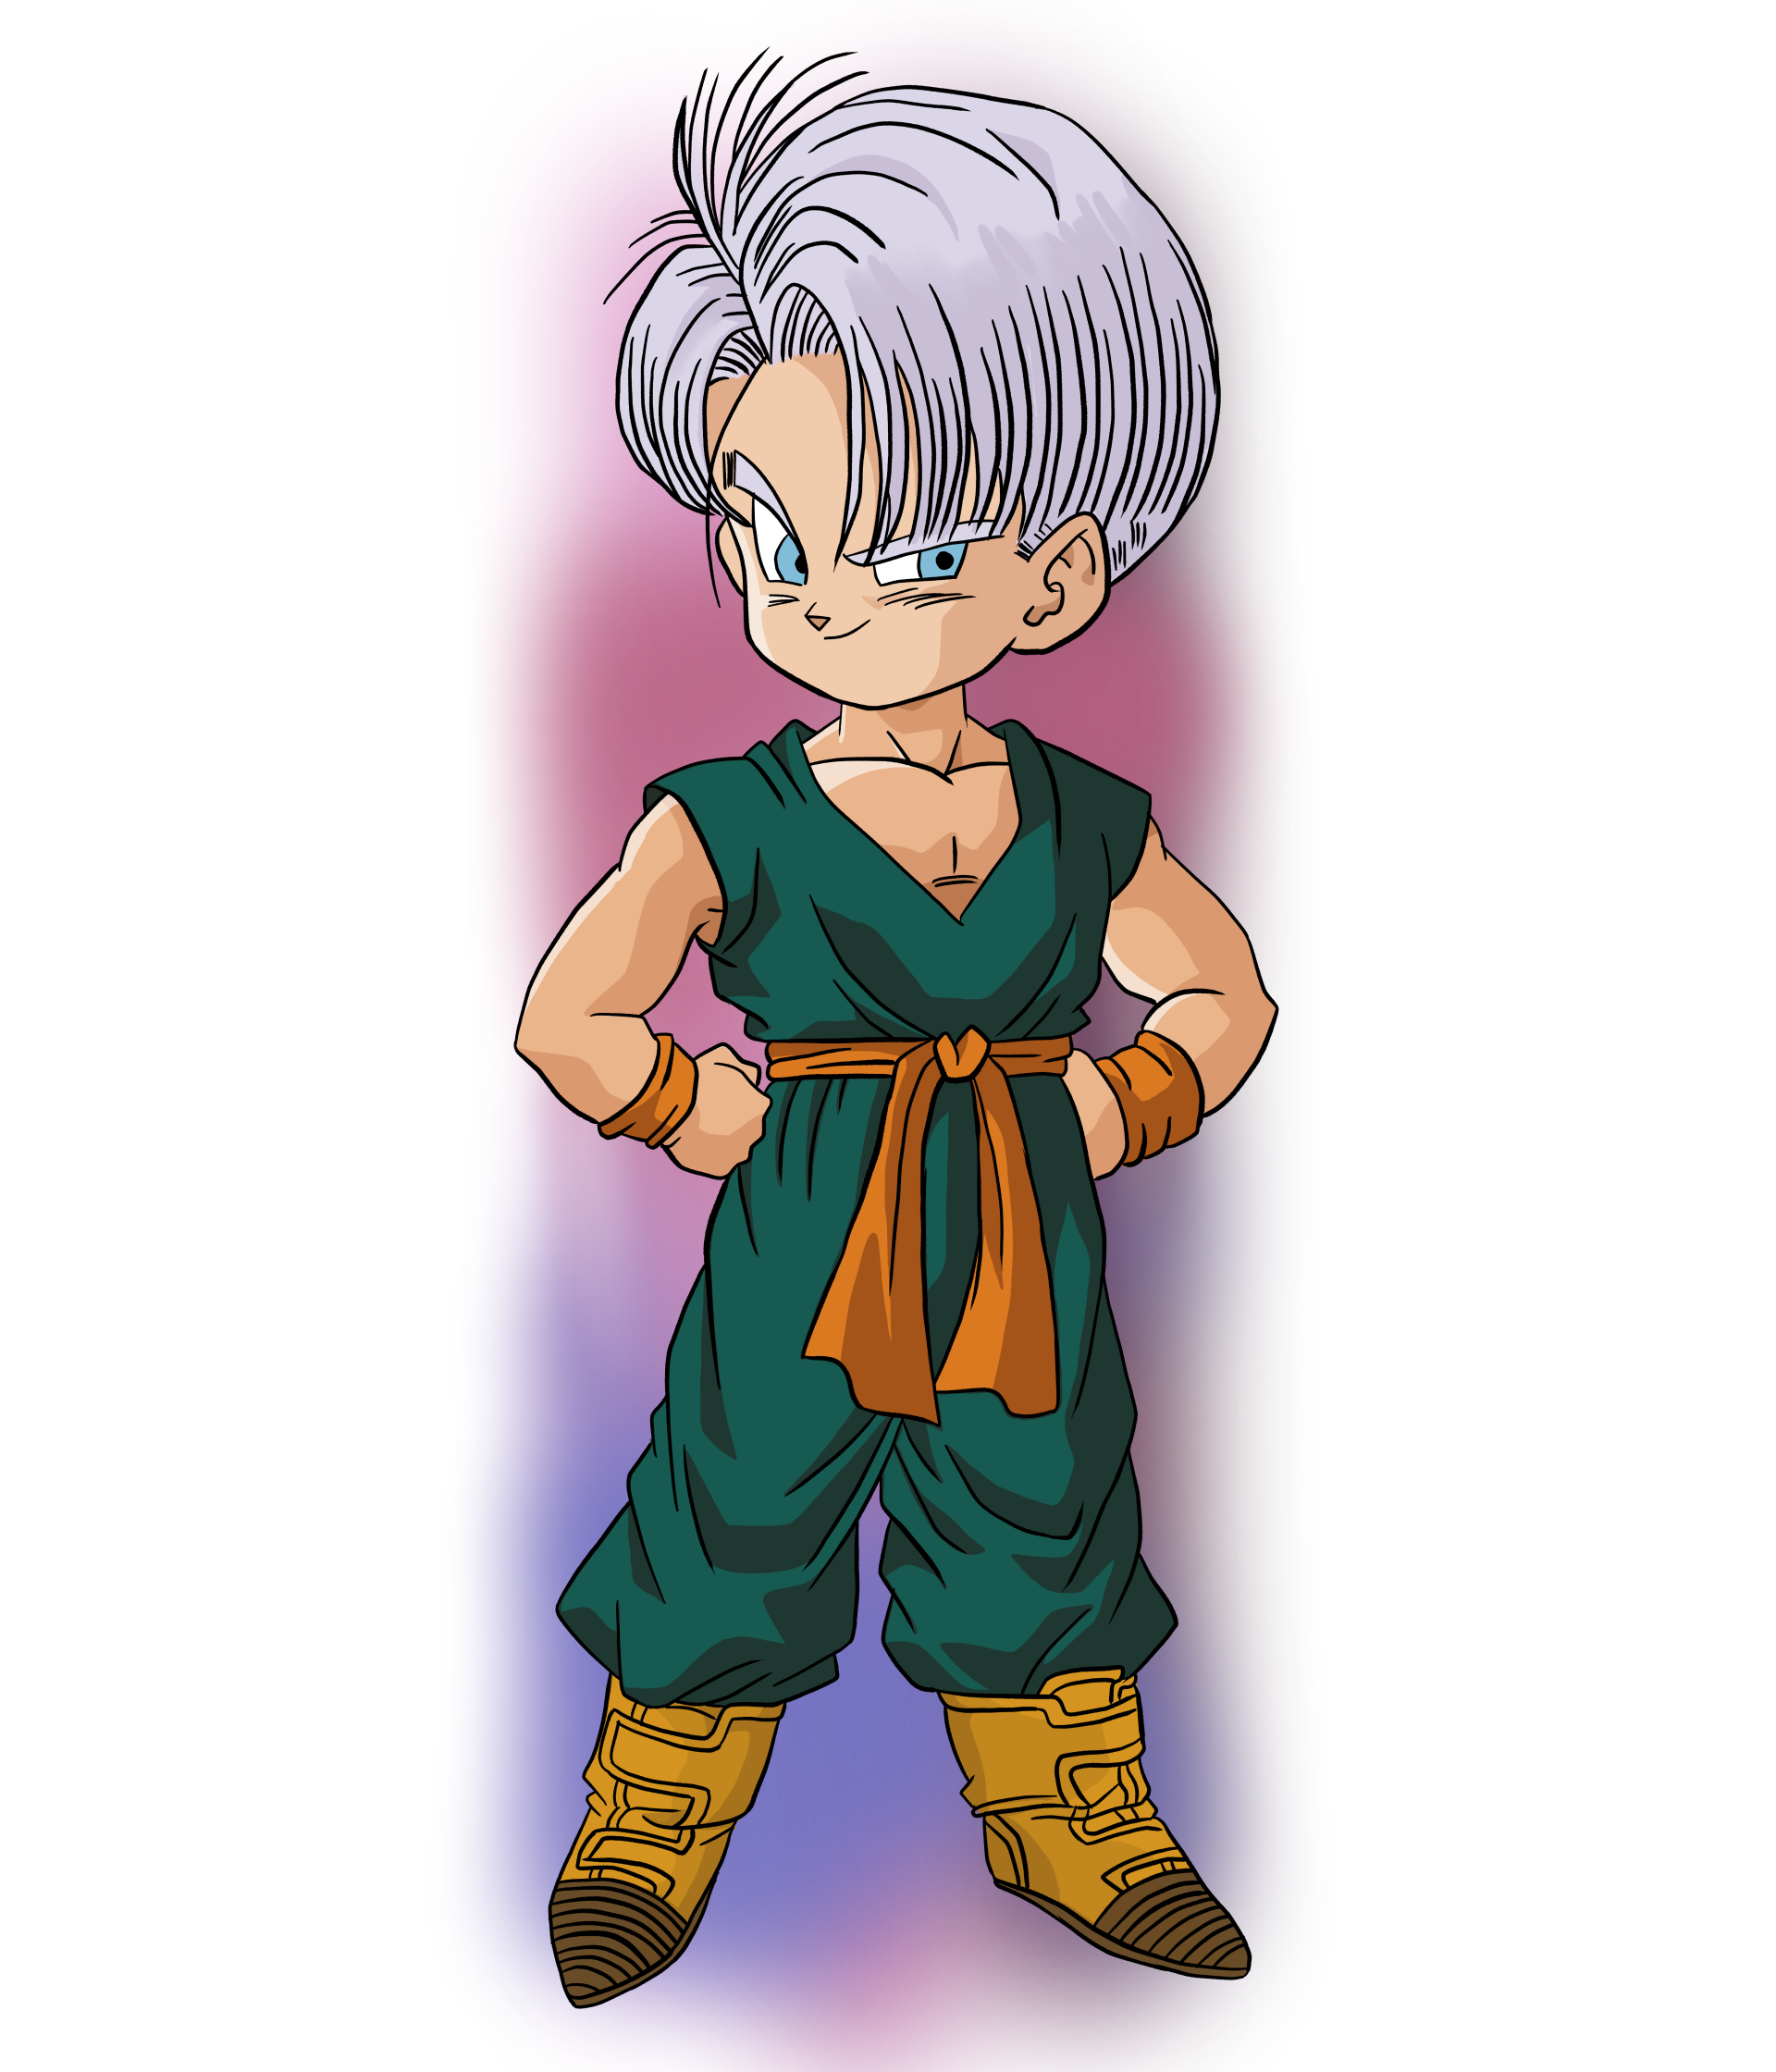 Trunk Dragon Ball Z Image - ID: 395337 - Image Abyss